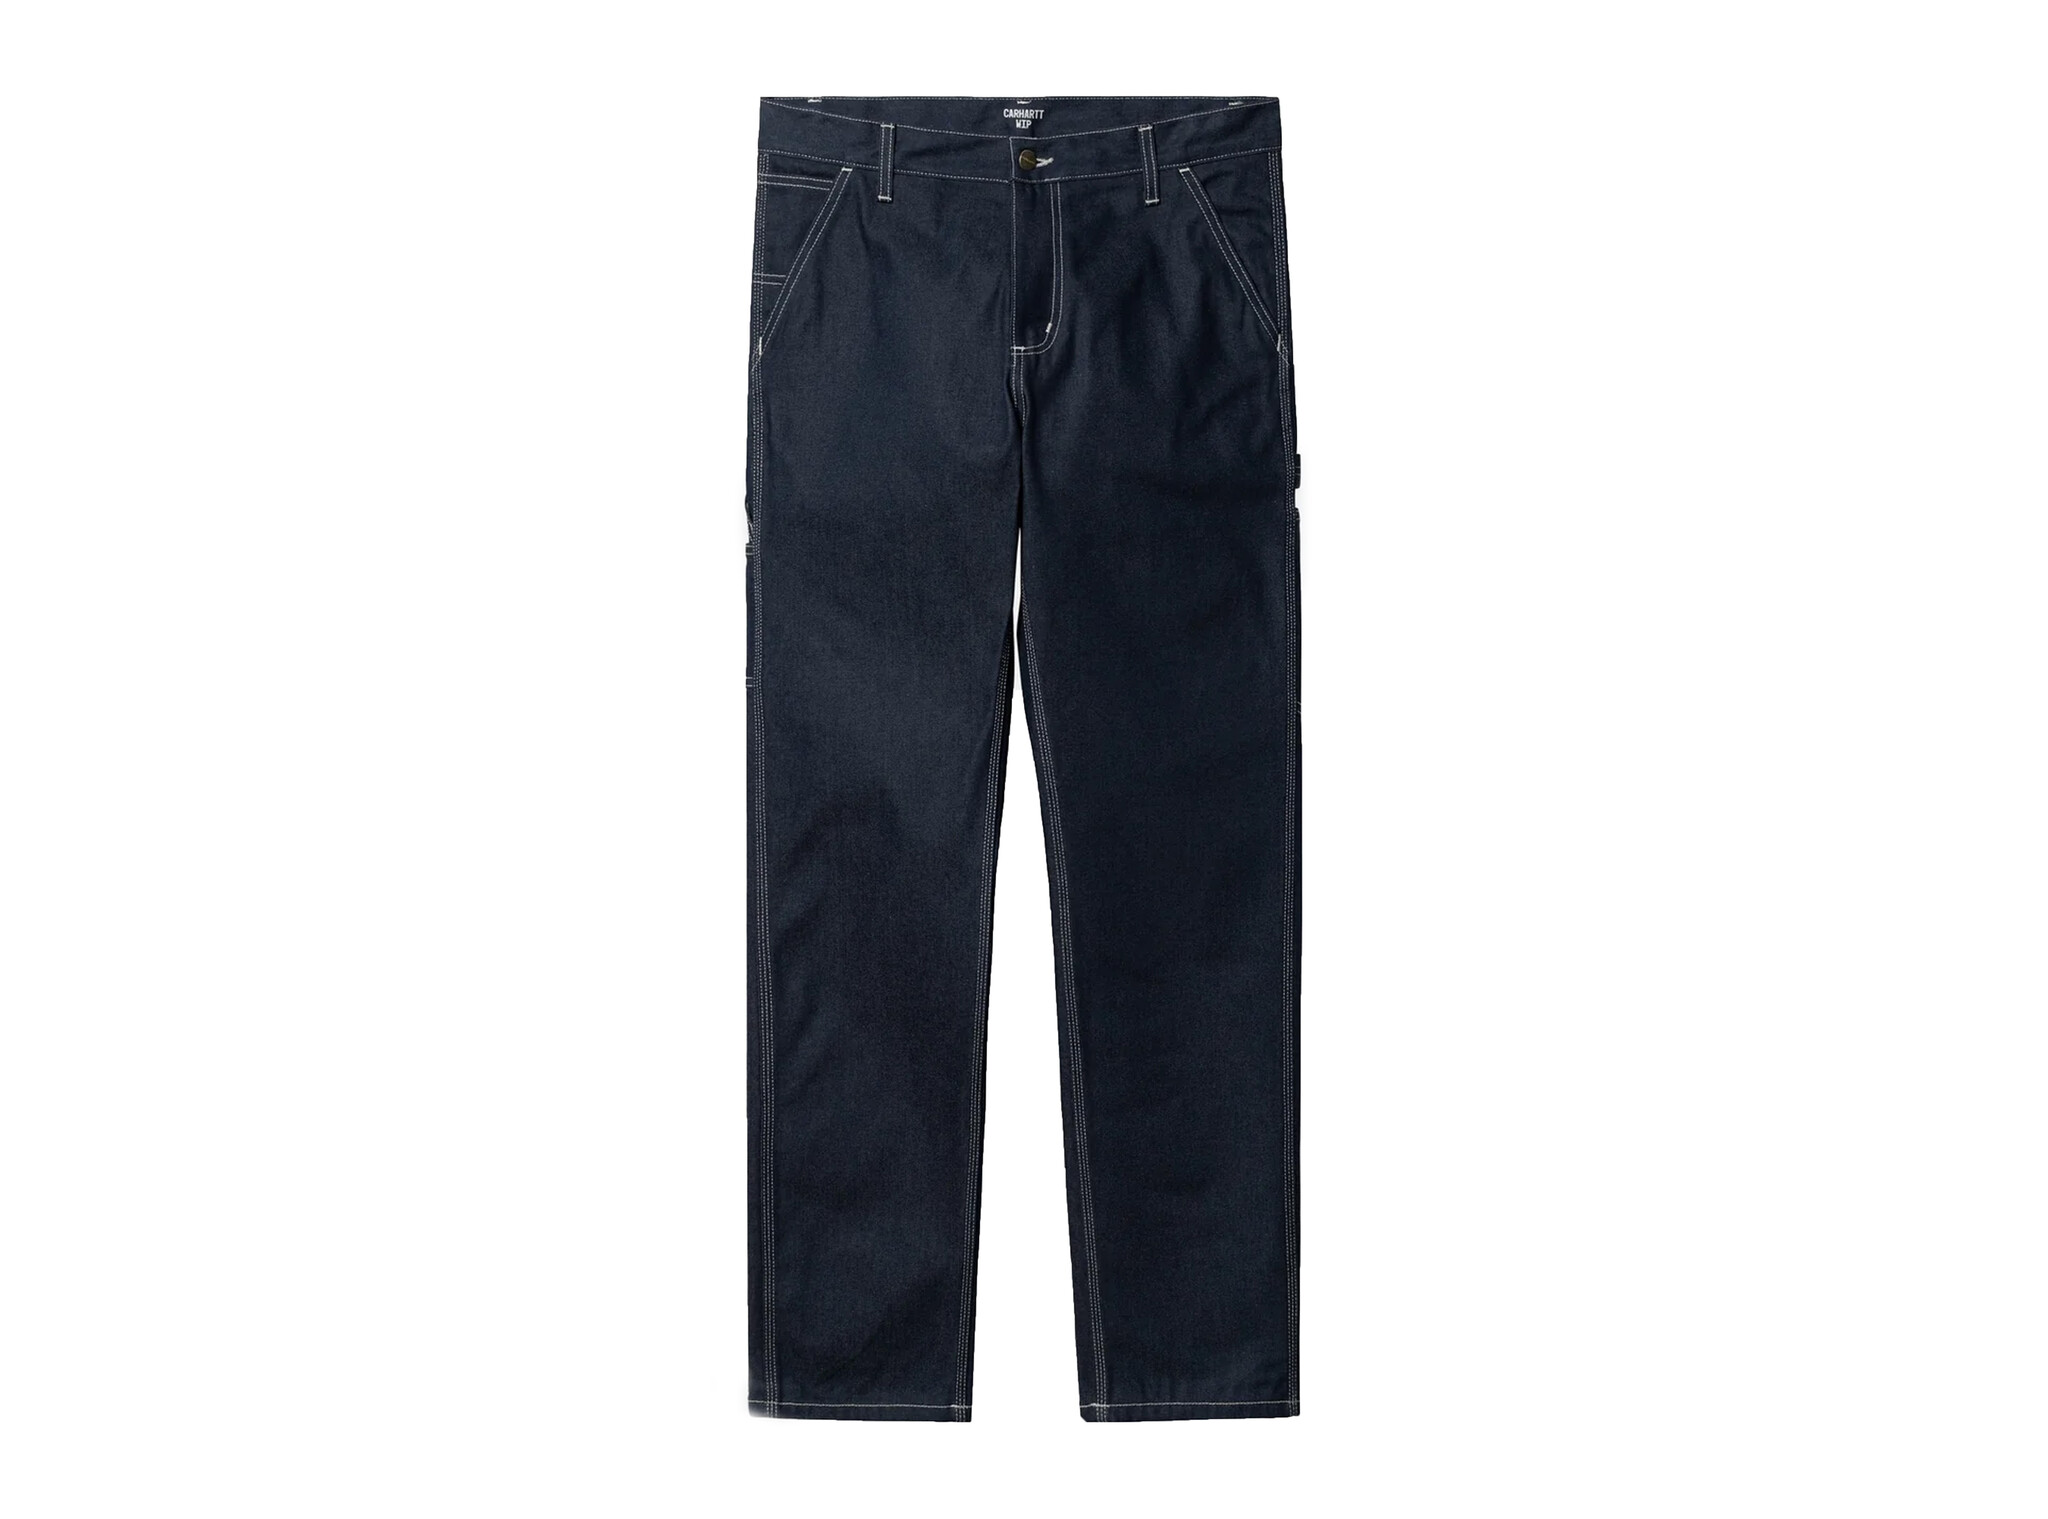 Carhartt WIP Abbot Tapered Trousers, Navy at John Lewis & Partners